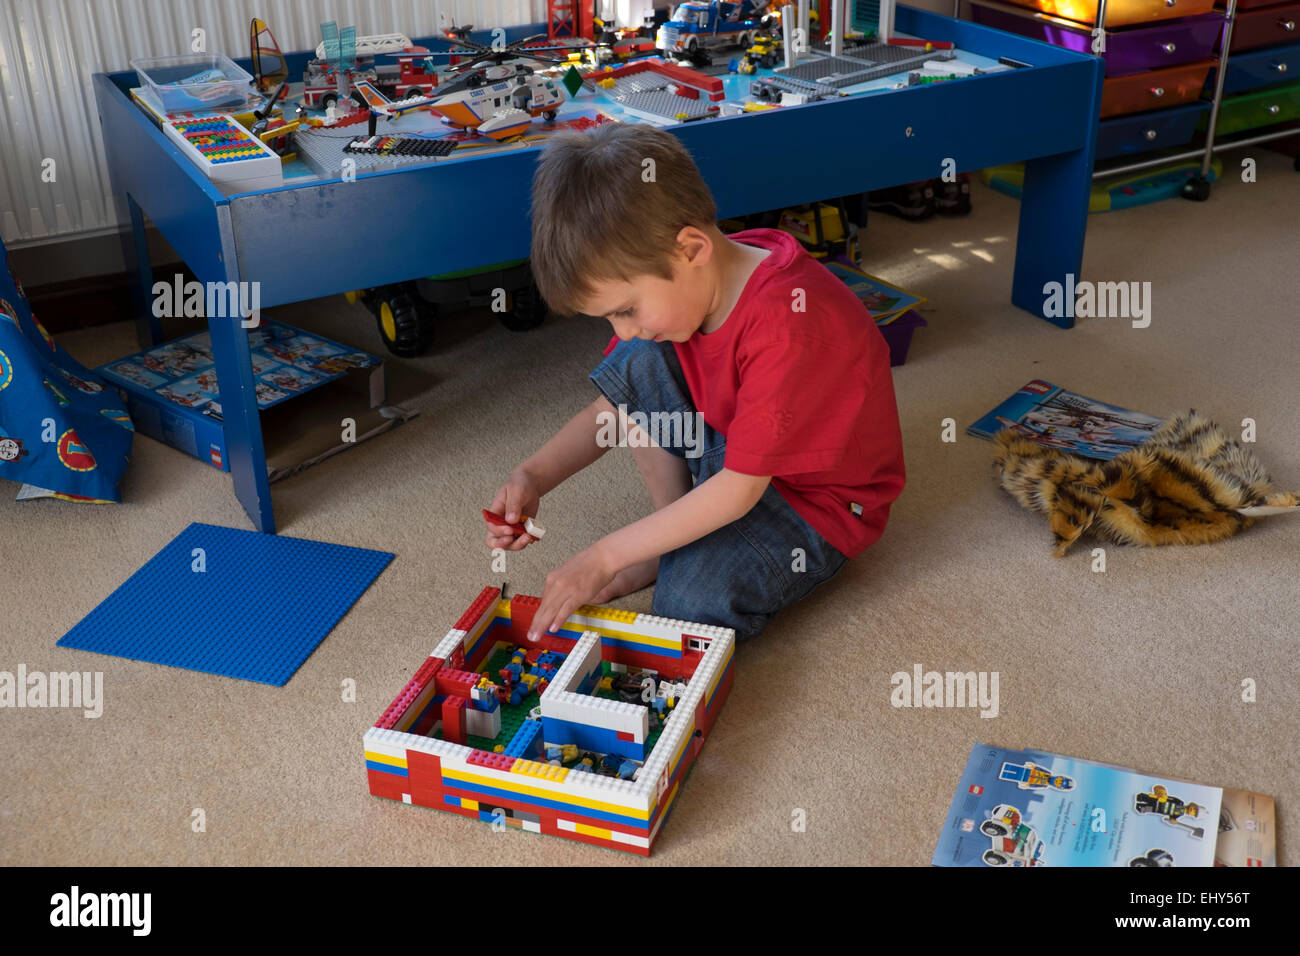 Boy aged four years playing with Lego building blocks in bedroom Stock Photo